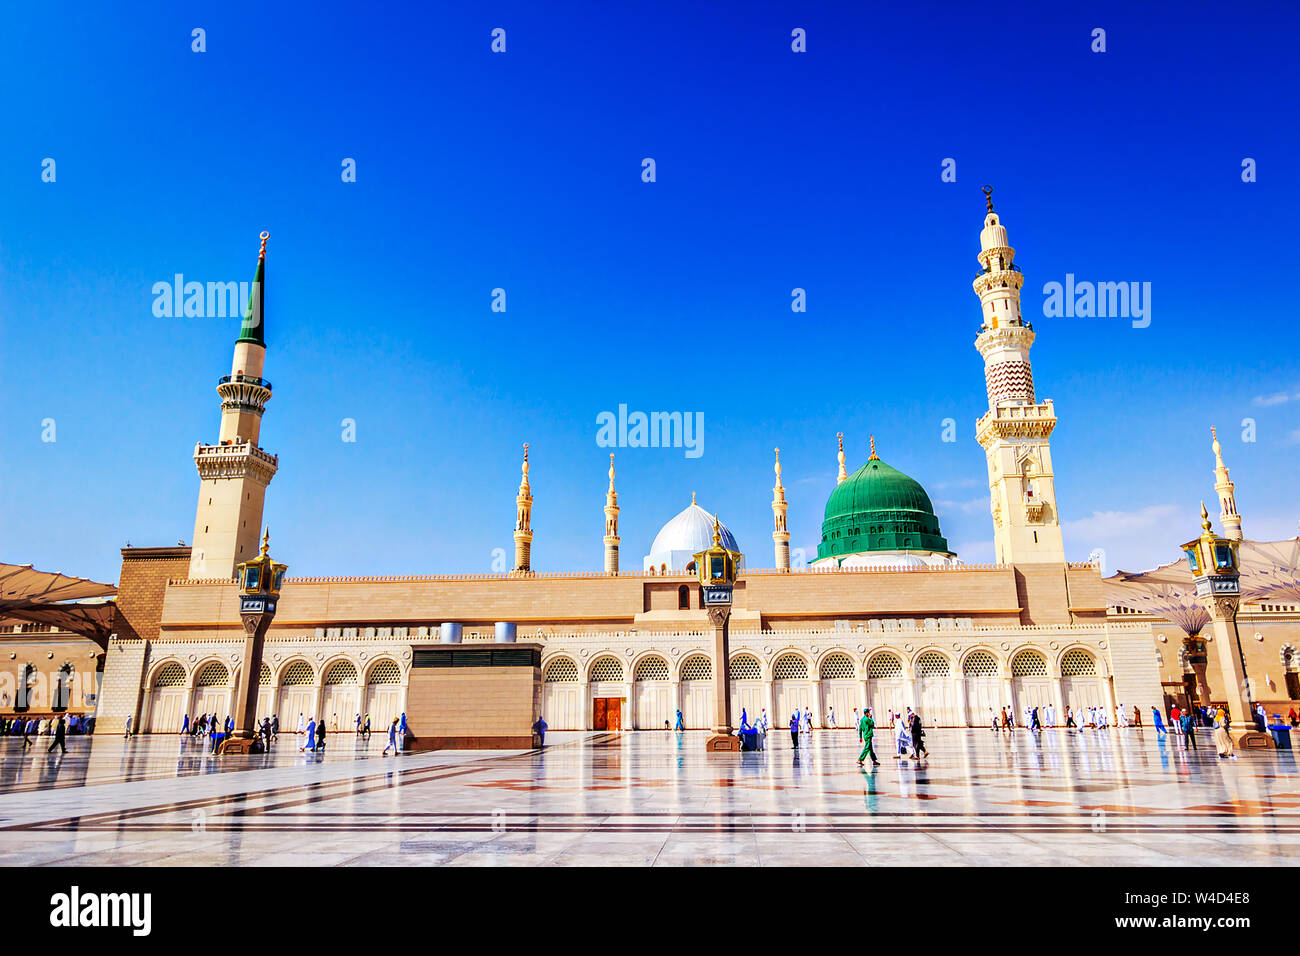 This Holy masjid located in the city of Madinah in Saudi Arabia. It is the one of the largest mosque in the world It is the second holiest site in Isl Stock Photo